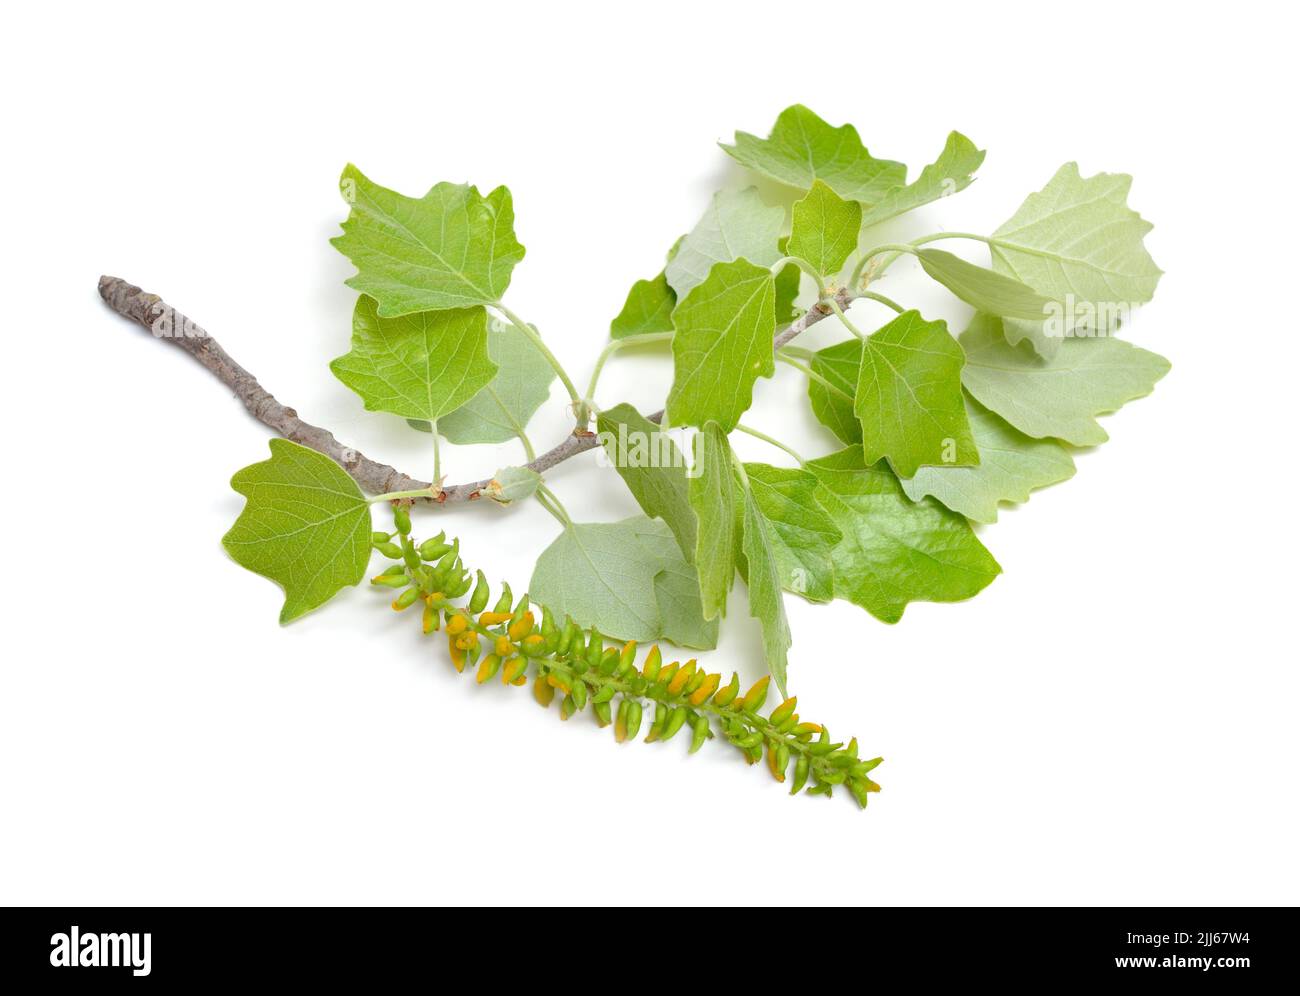 Populus alba, commonly called silver poplar, silverleaf poplar, or white poplar. Flowering branch. Isolated on white background. Stock Photo